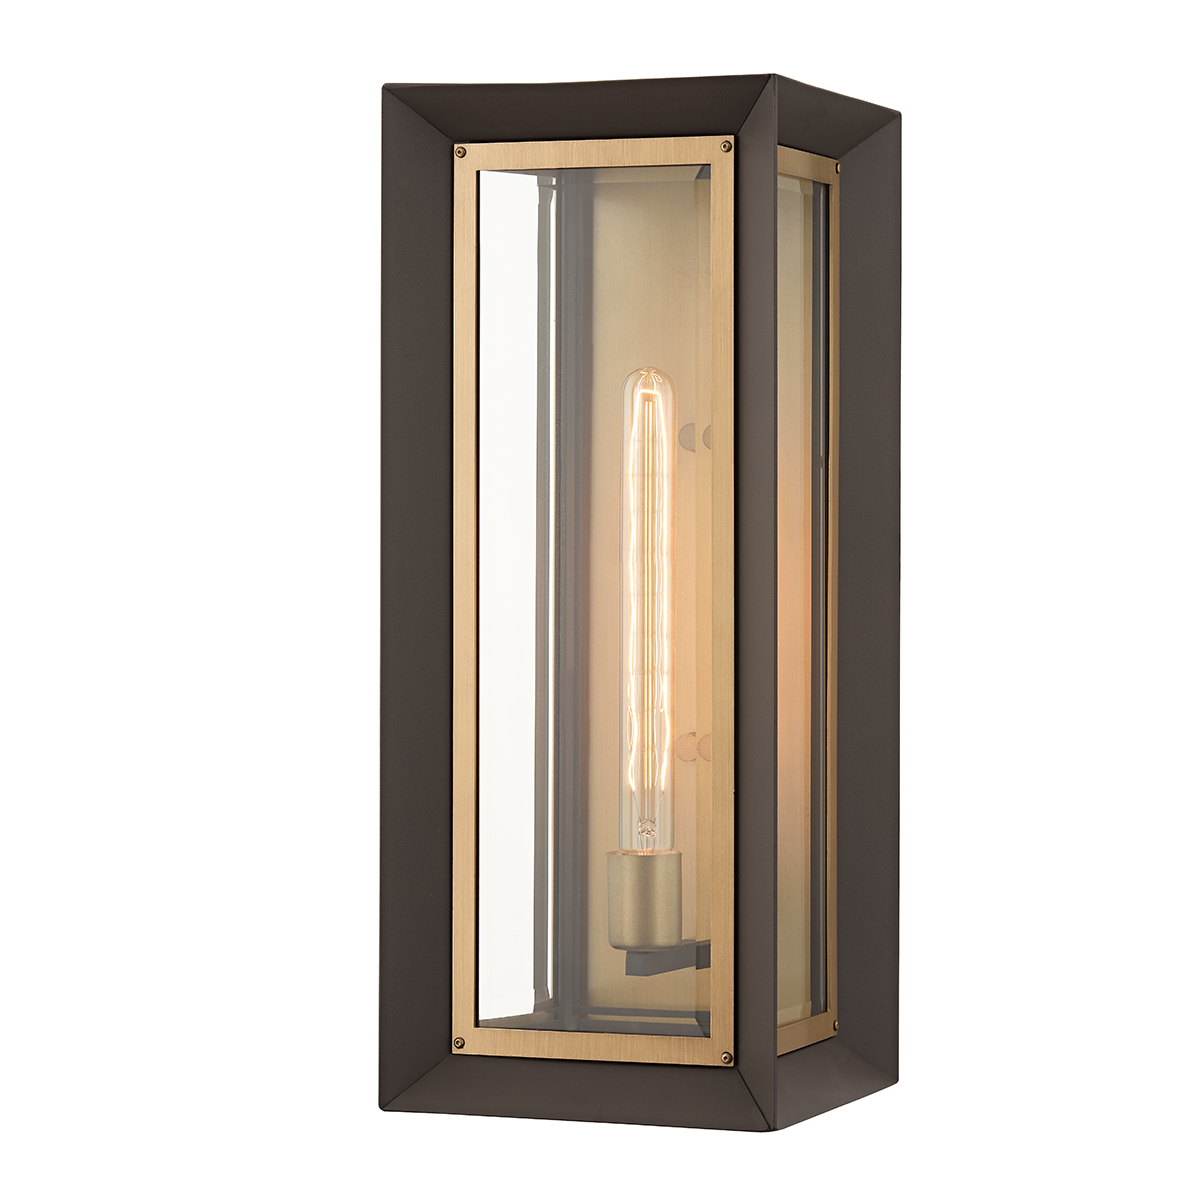 Troy LOWRY 1 LIGHT LARGE EXTERIOR WALL SCONCE B4053 Outdoor l Wall Troy Lighting TEXTURED BRONZE/PATINA BRASS  